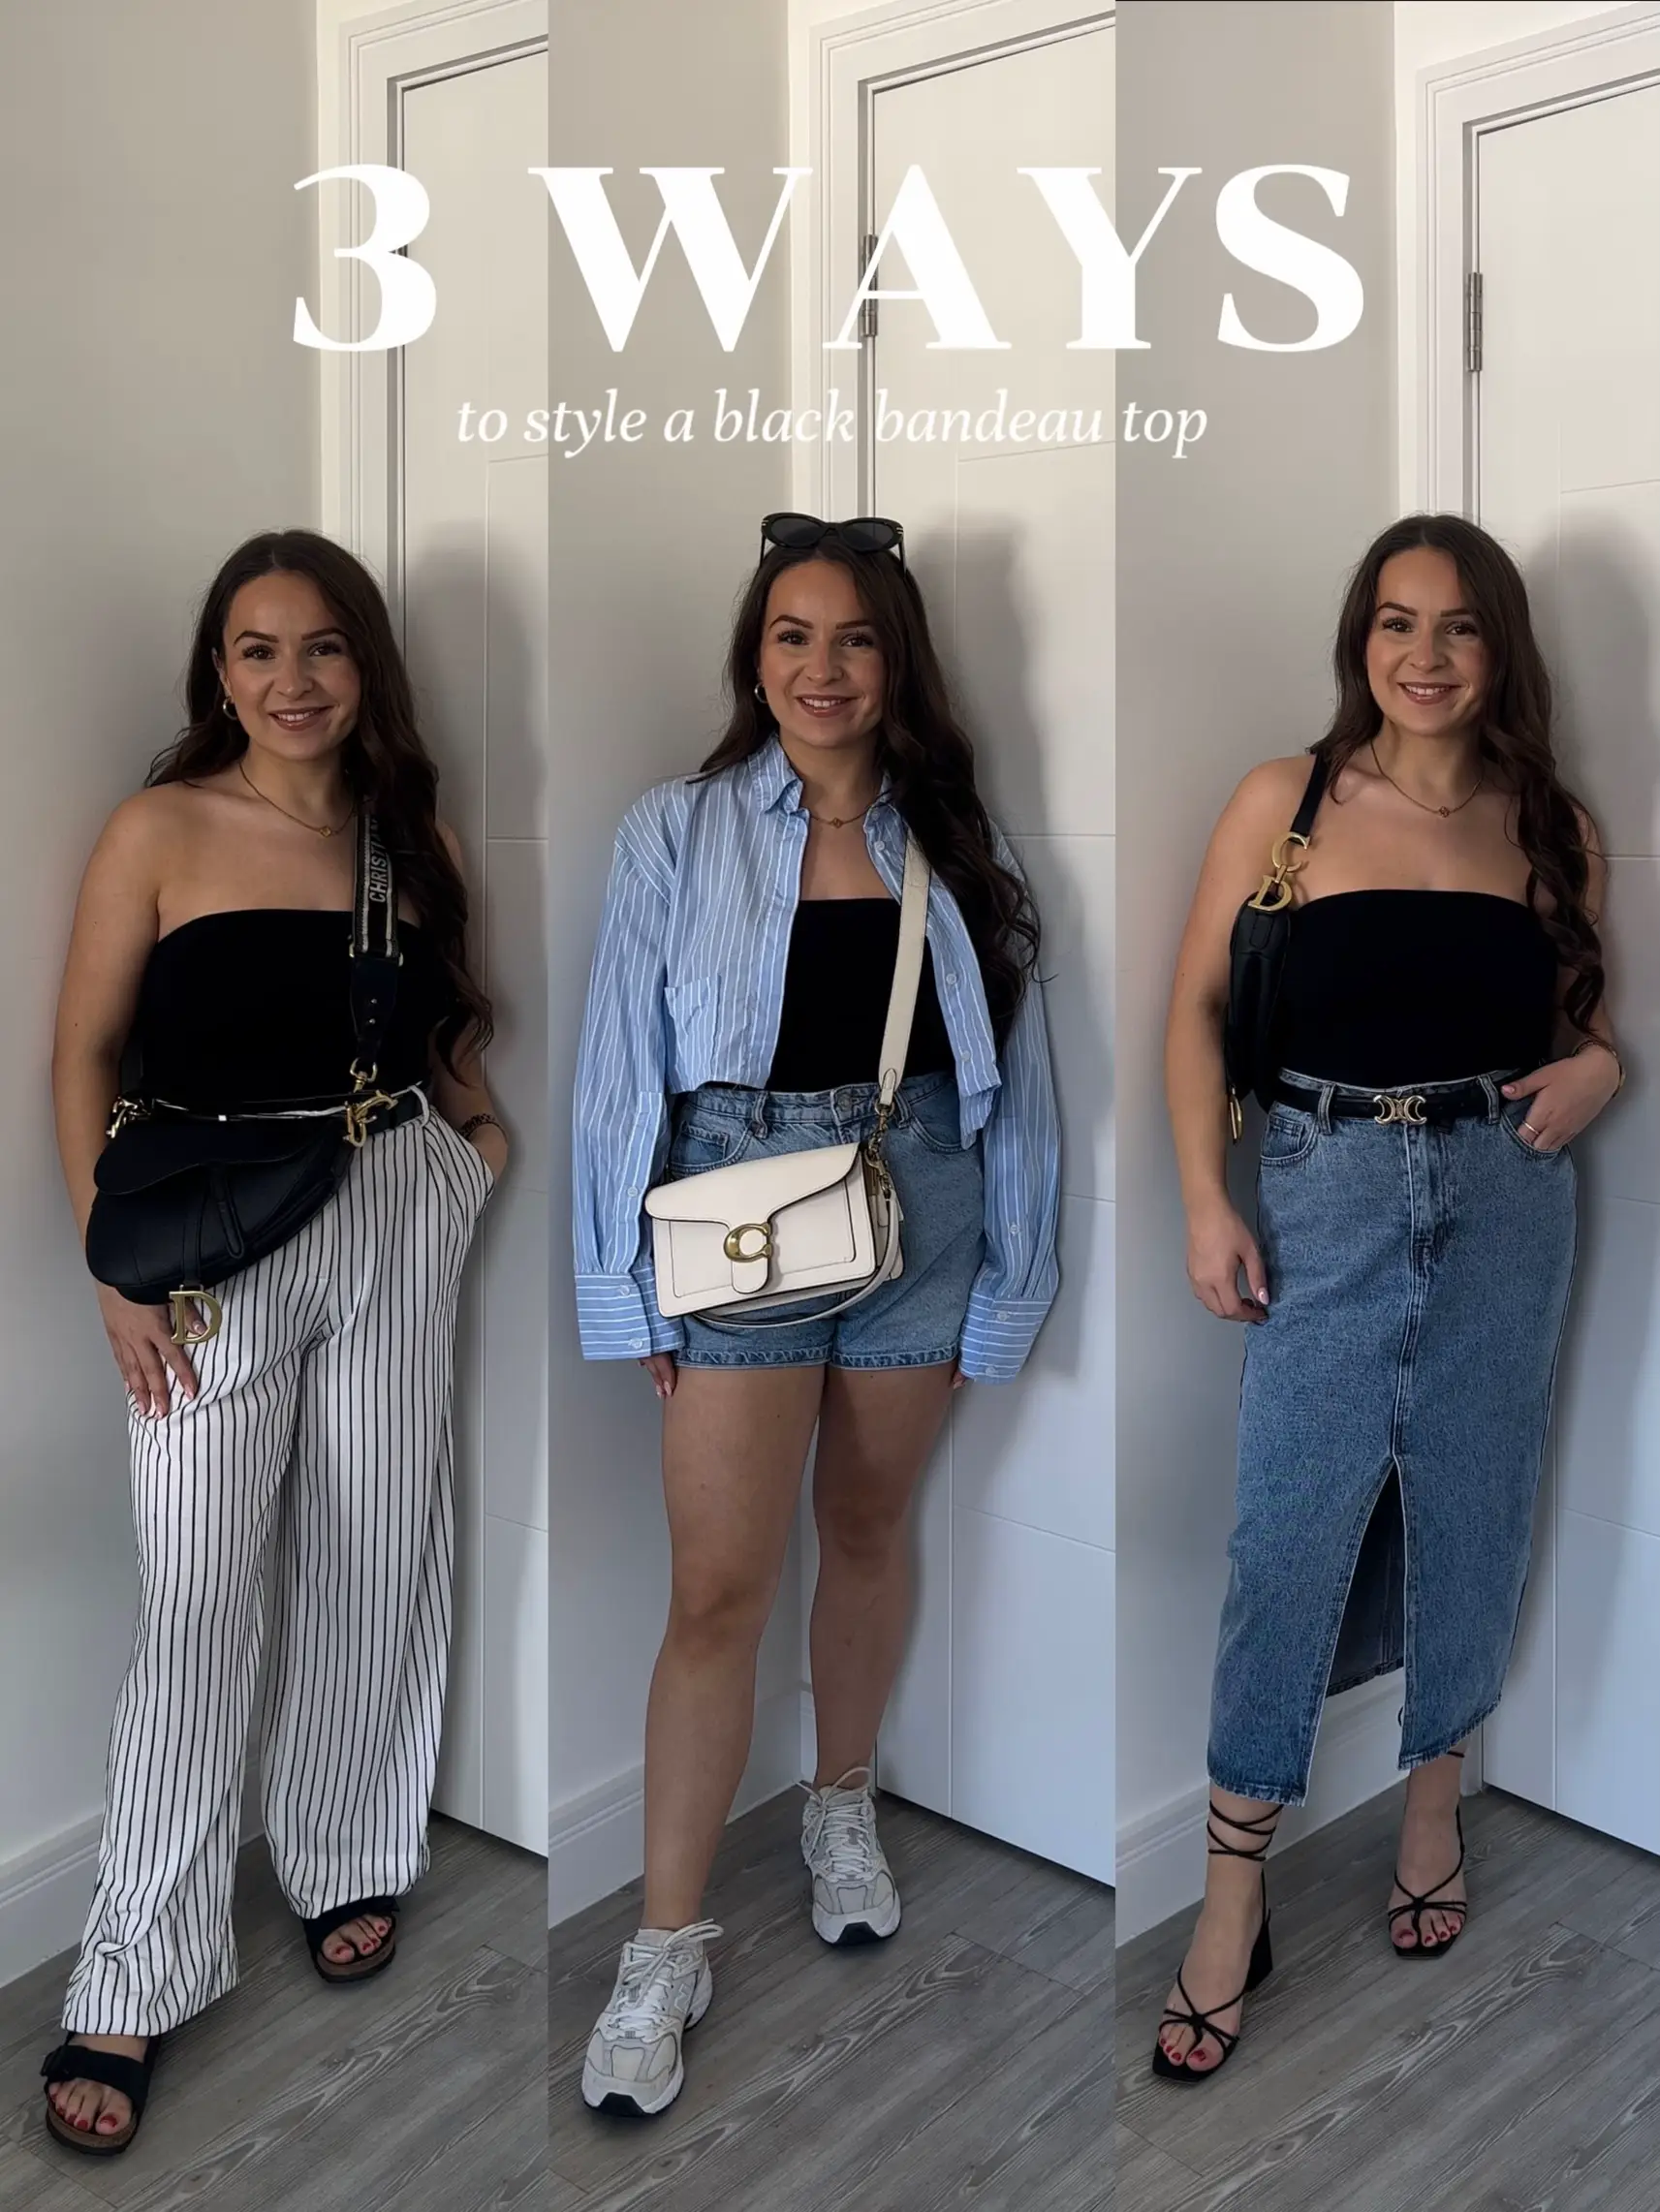 3 WAYS TO STYLE A BLACK BANDEAU TOP 🖤